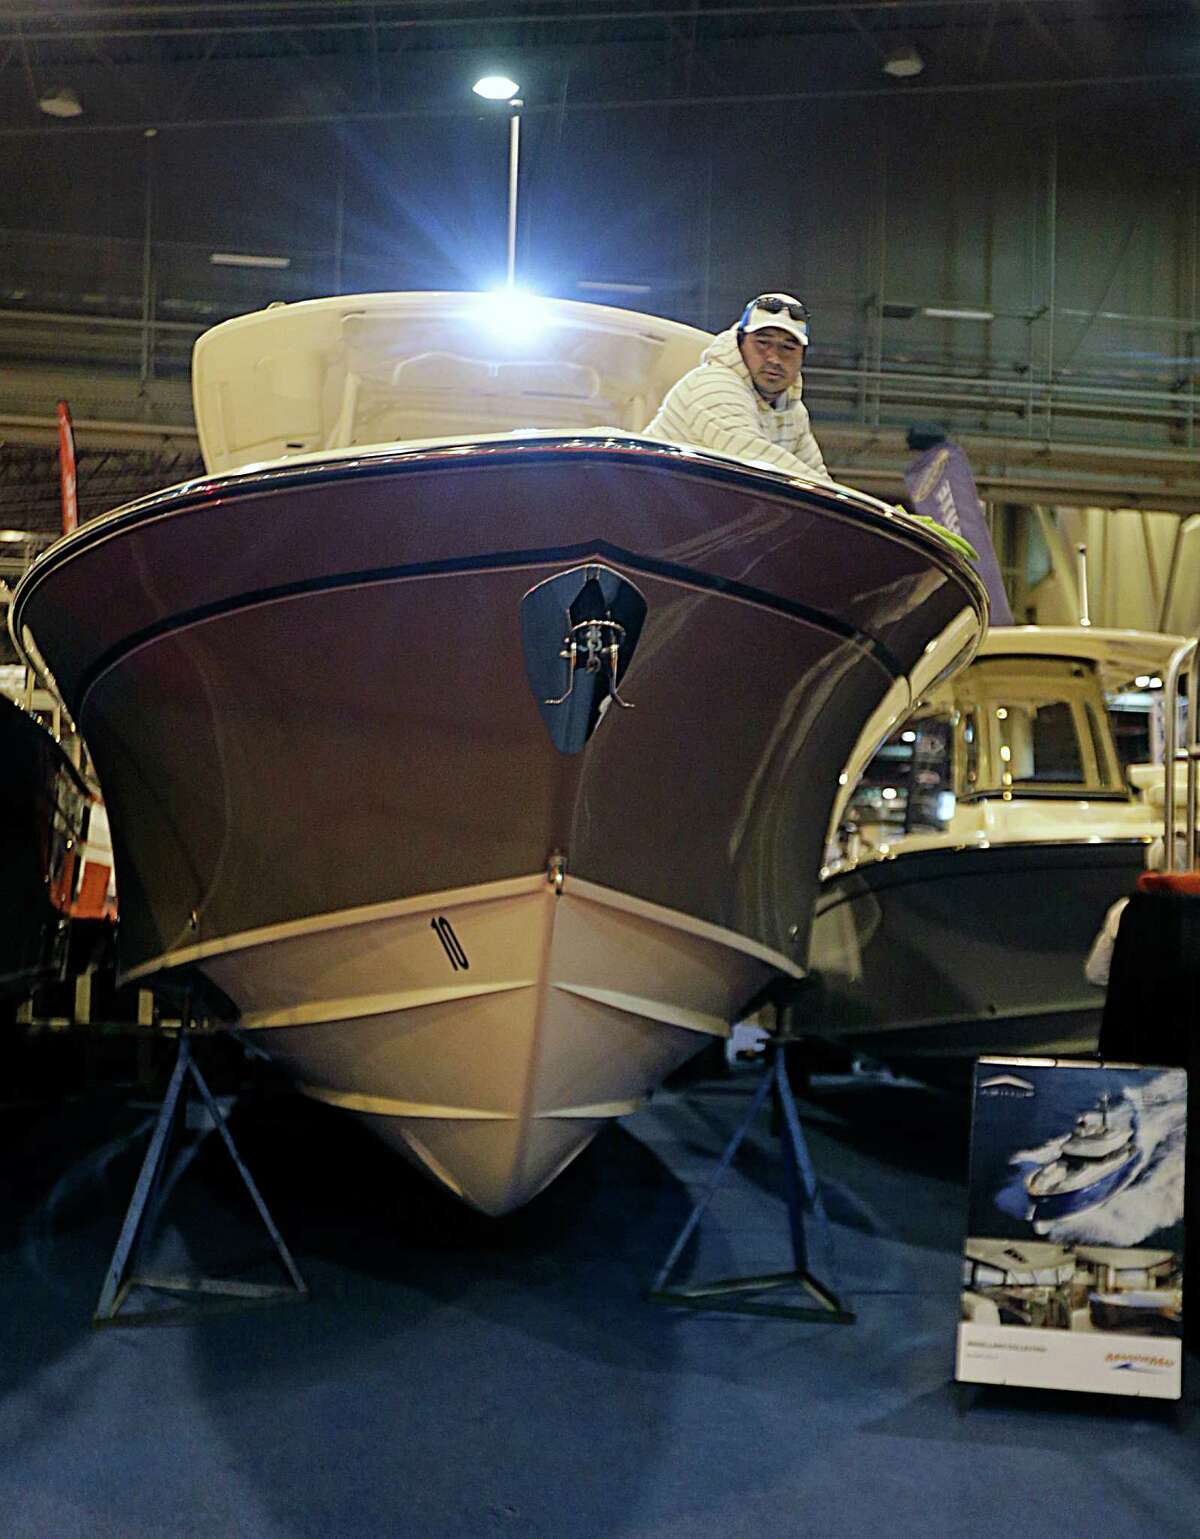 Malon Trigueros puts the finishing touches on a Grady White center console boat in the MarineMax booth during setup for The Houston International Boat, Sport & Travel Show Jan. 5, 2017, in Houston. ( James Nielsen / Houston Chronicle )